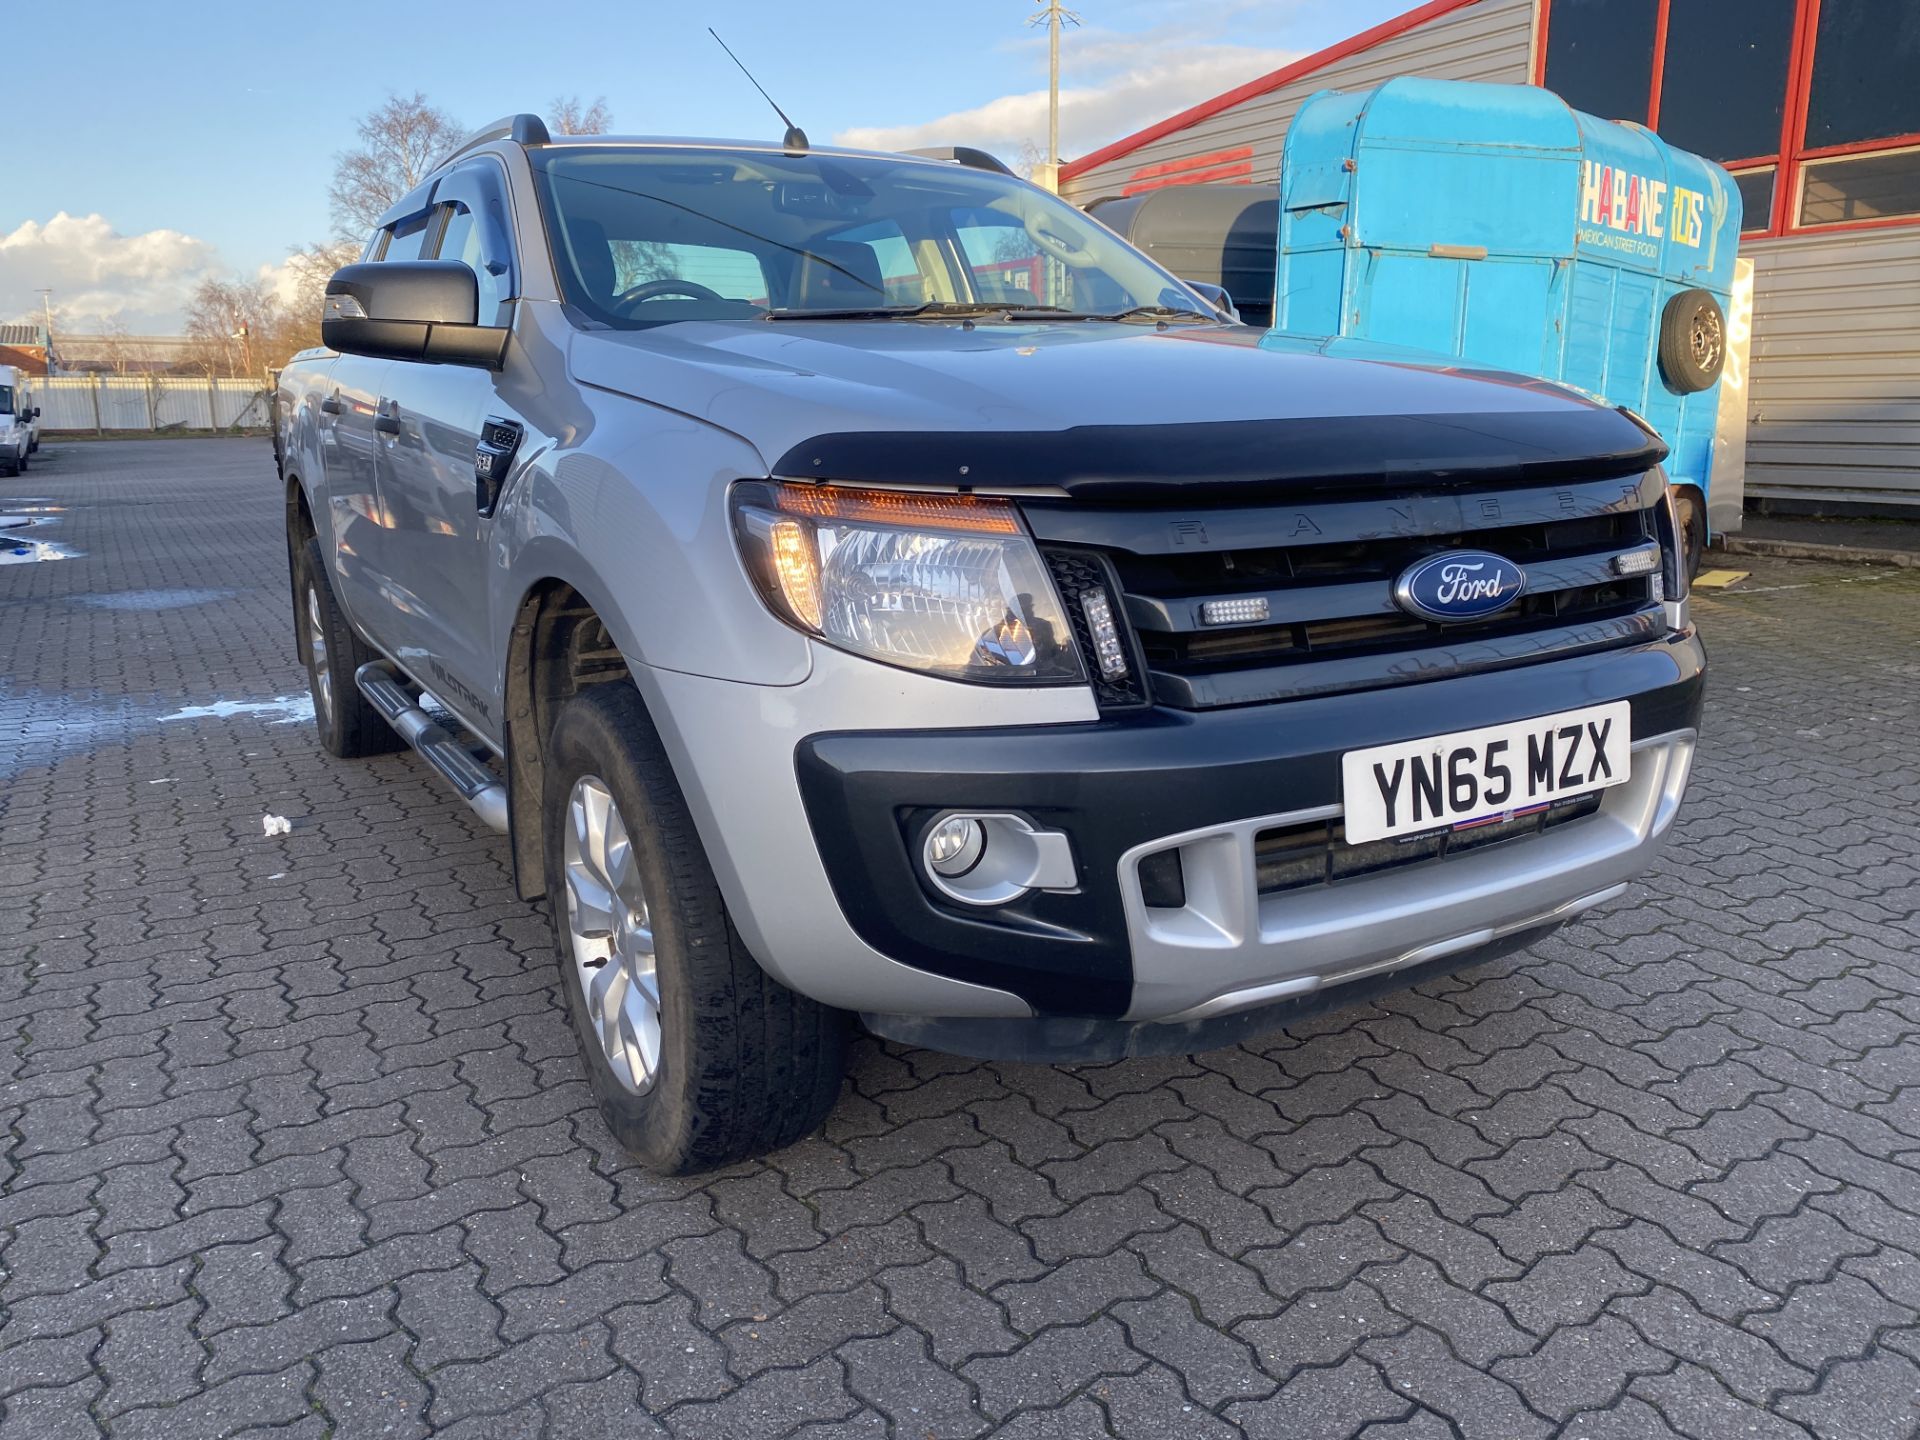 Ford Ranger Wildtrak 4 x 4 3.2 TDCI 6 Speed Automatic Double Cab Pick Up Truck, Silver